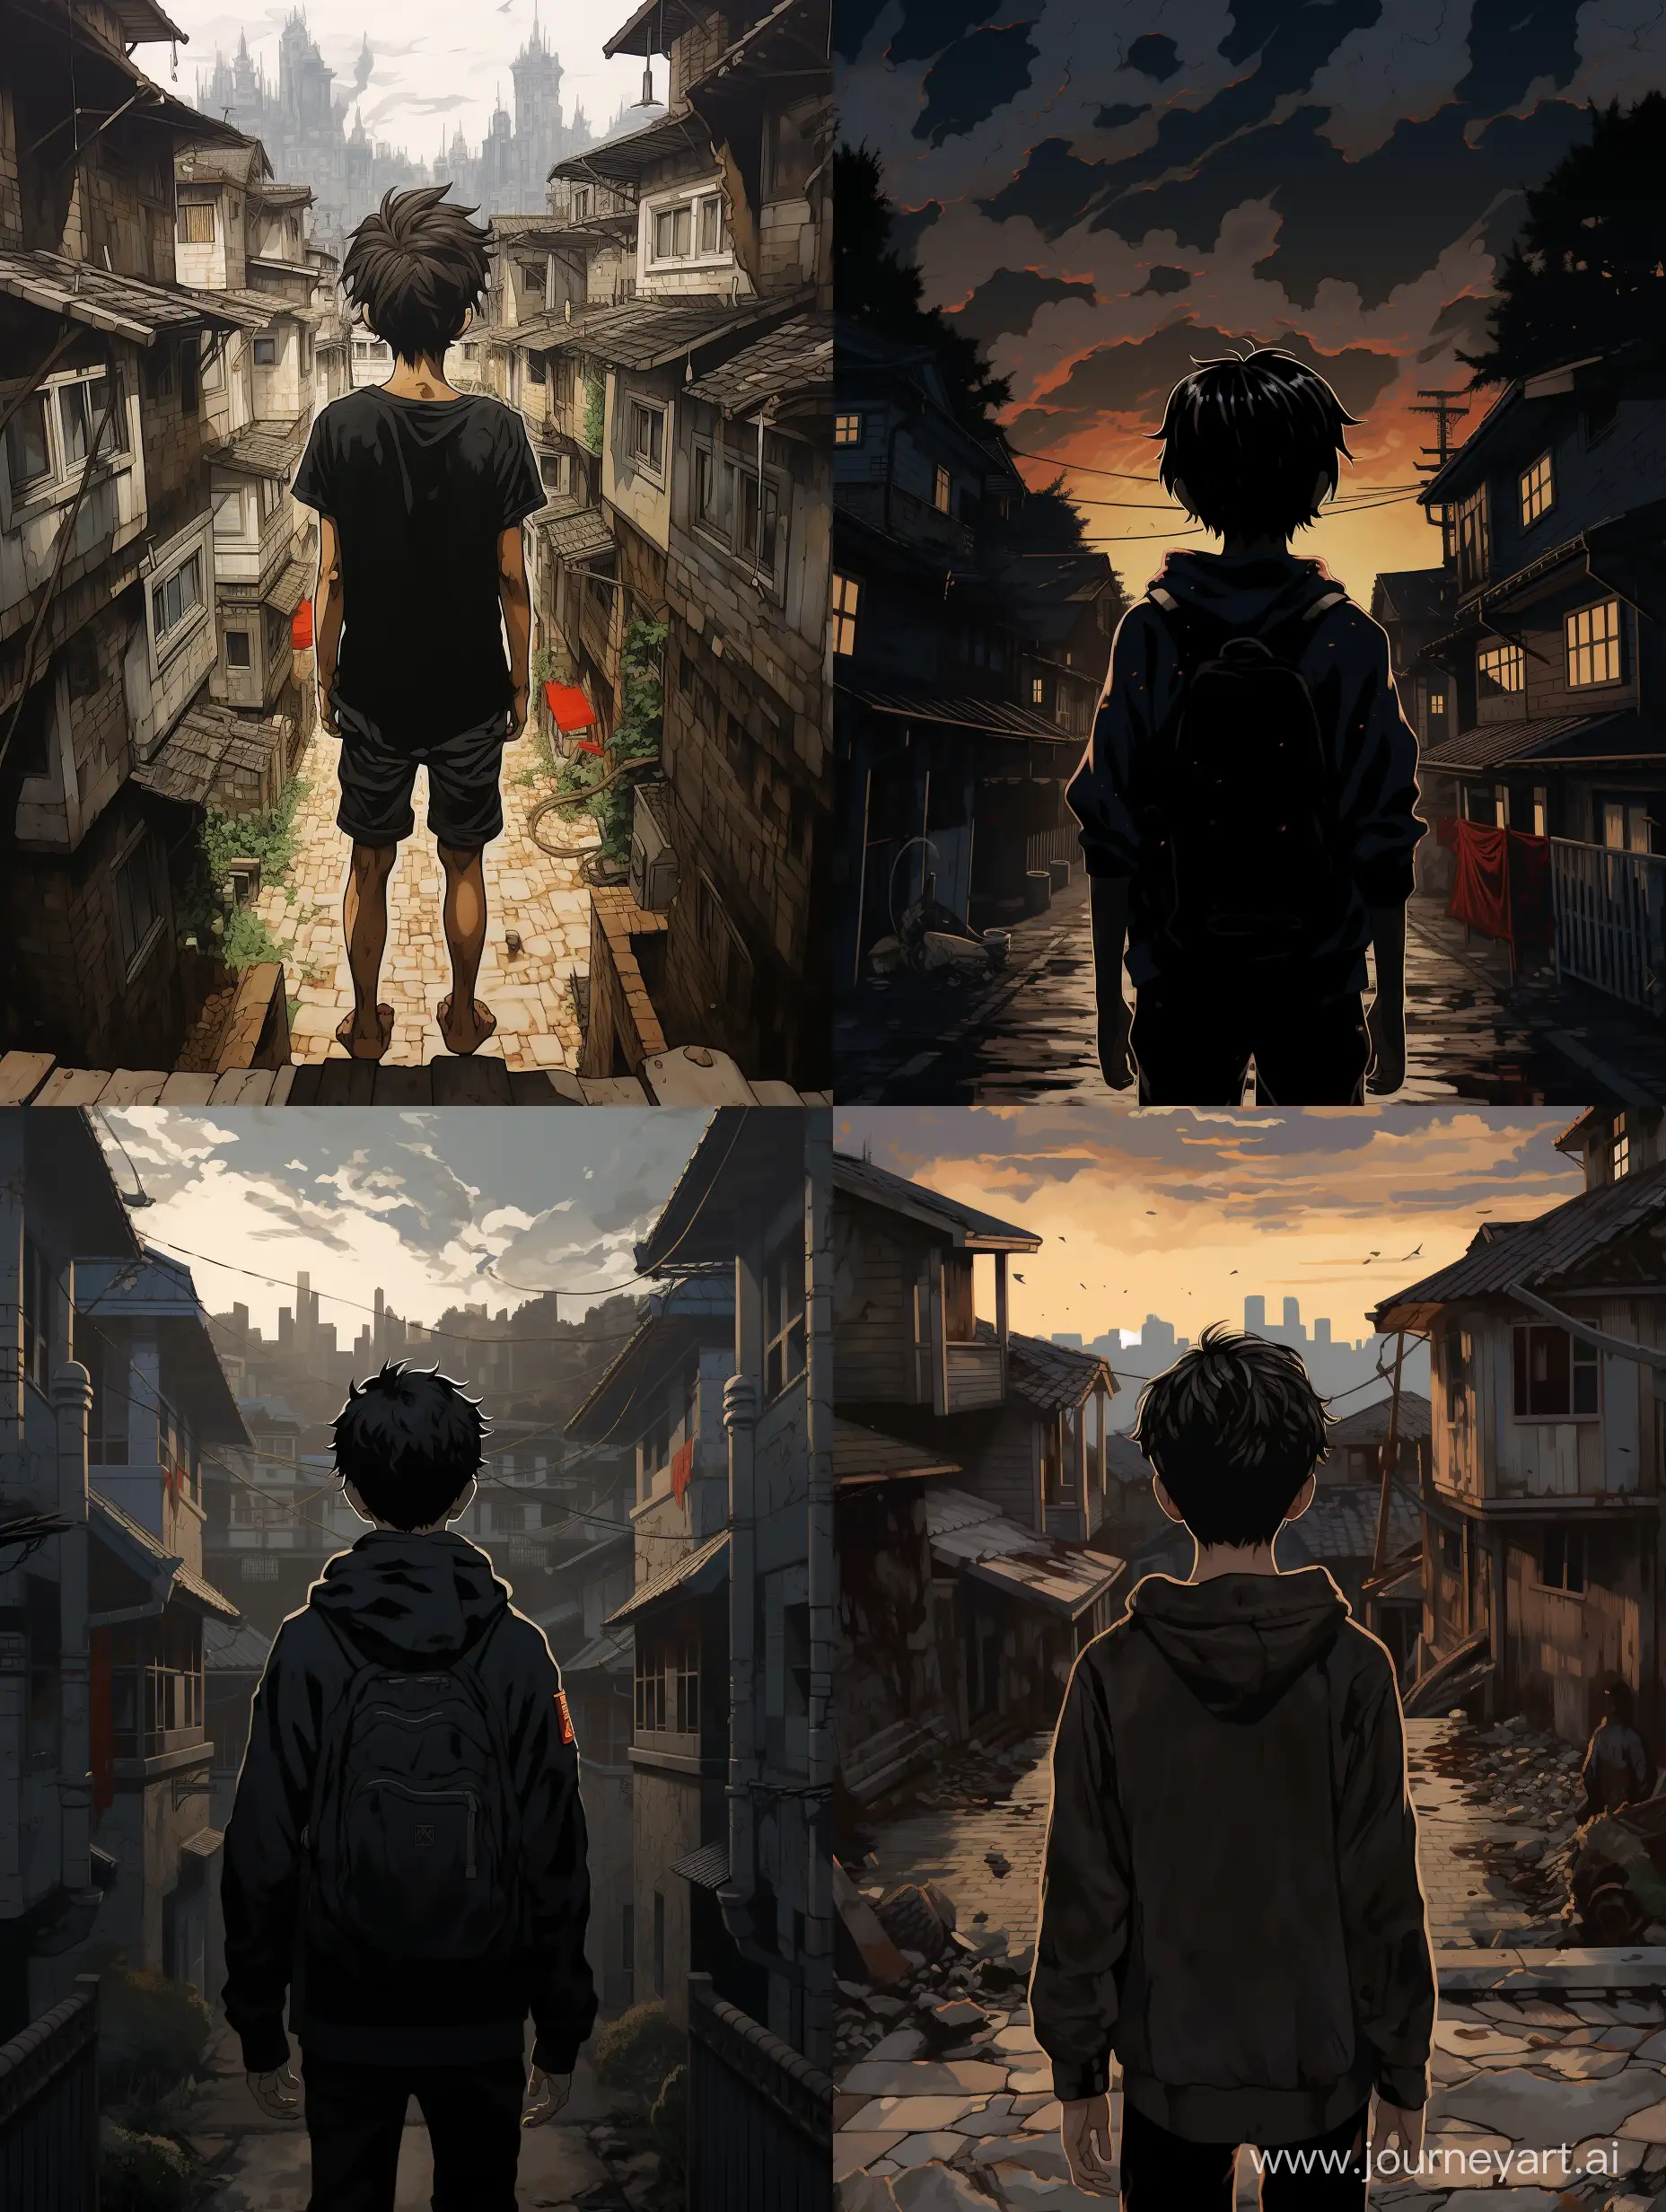 the boy, back, anime style, stands in the middle of the houses like in Russia, style of Katsuhiro Otomo Akira film and demon slayer film, black dominance.